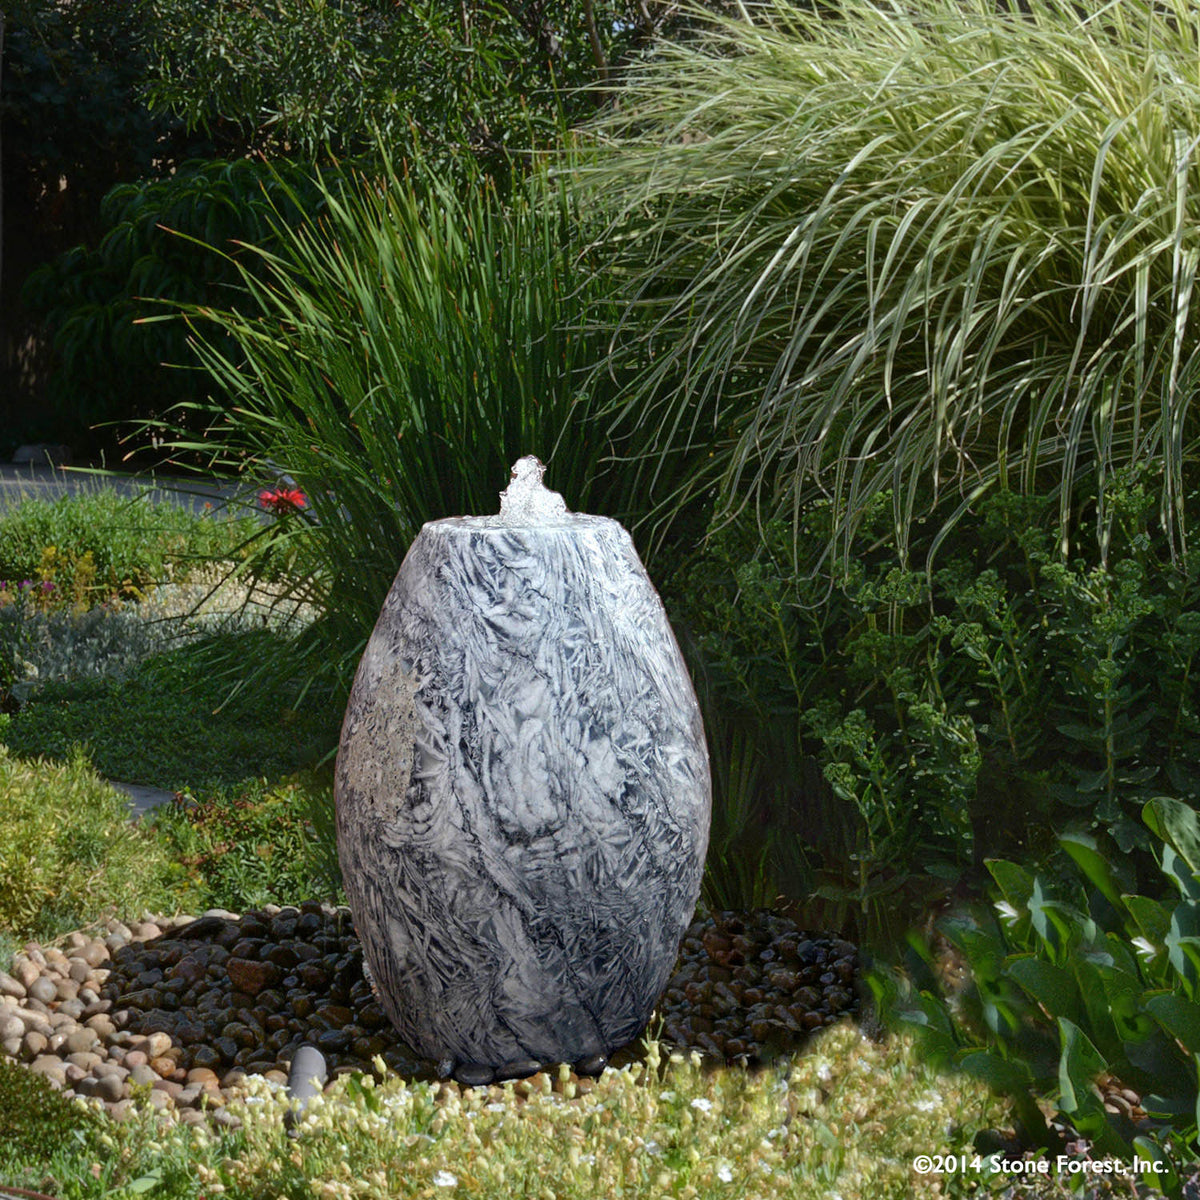 Stone Forest hand carved Bamboo Marble bulb shaped garden fountain image 1 of 3